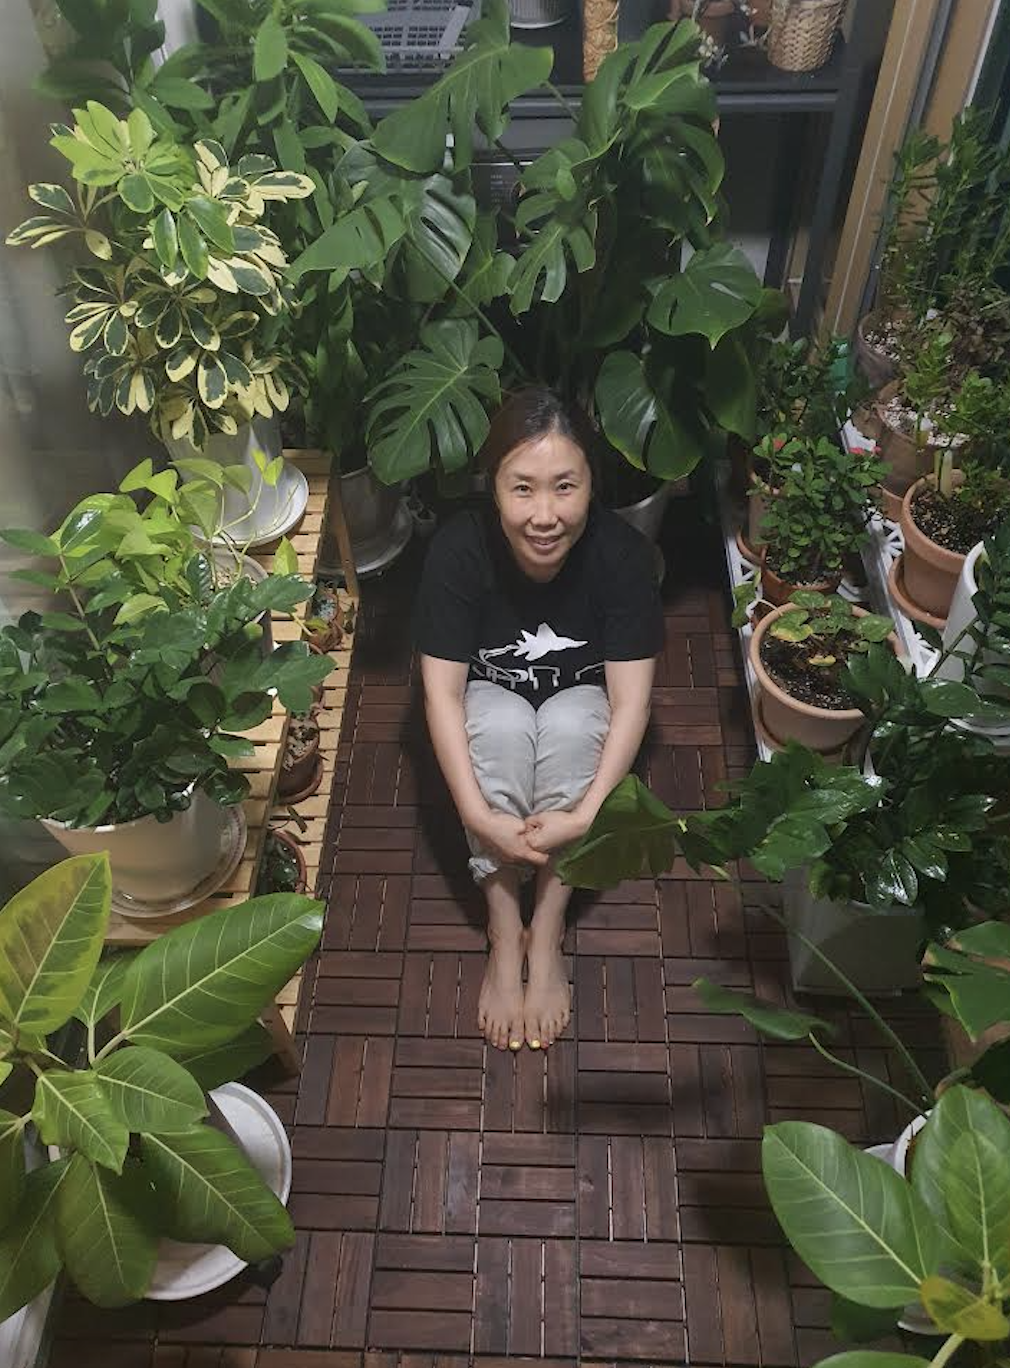 Mrs. Je enjoys a breath of fresh air from her green-children she raised with her green thumb. She grows many different types of flora in her balcony. Photo courtesy of Mrs. Je.